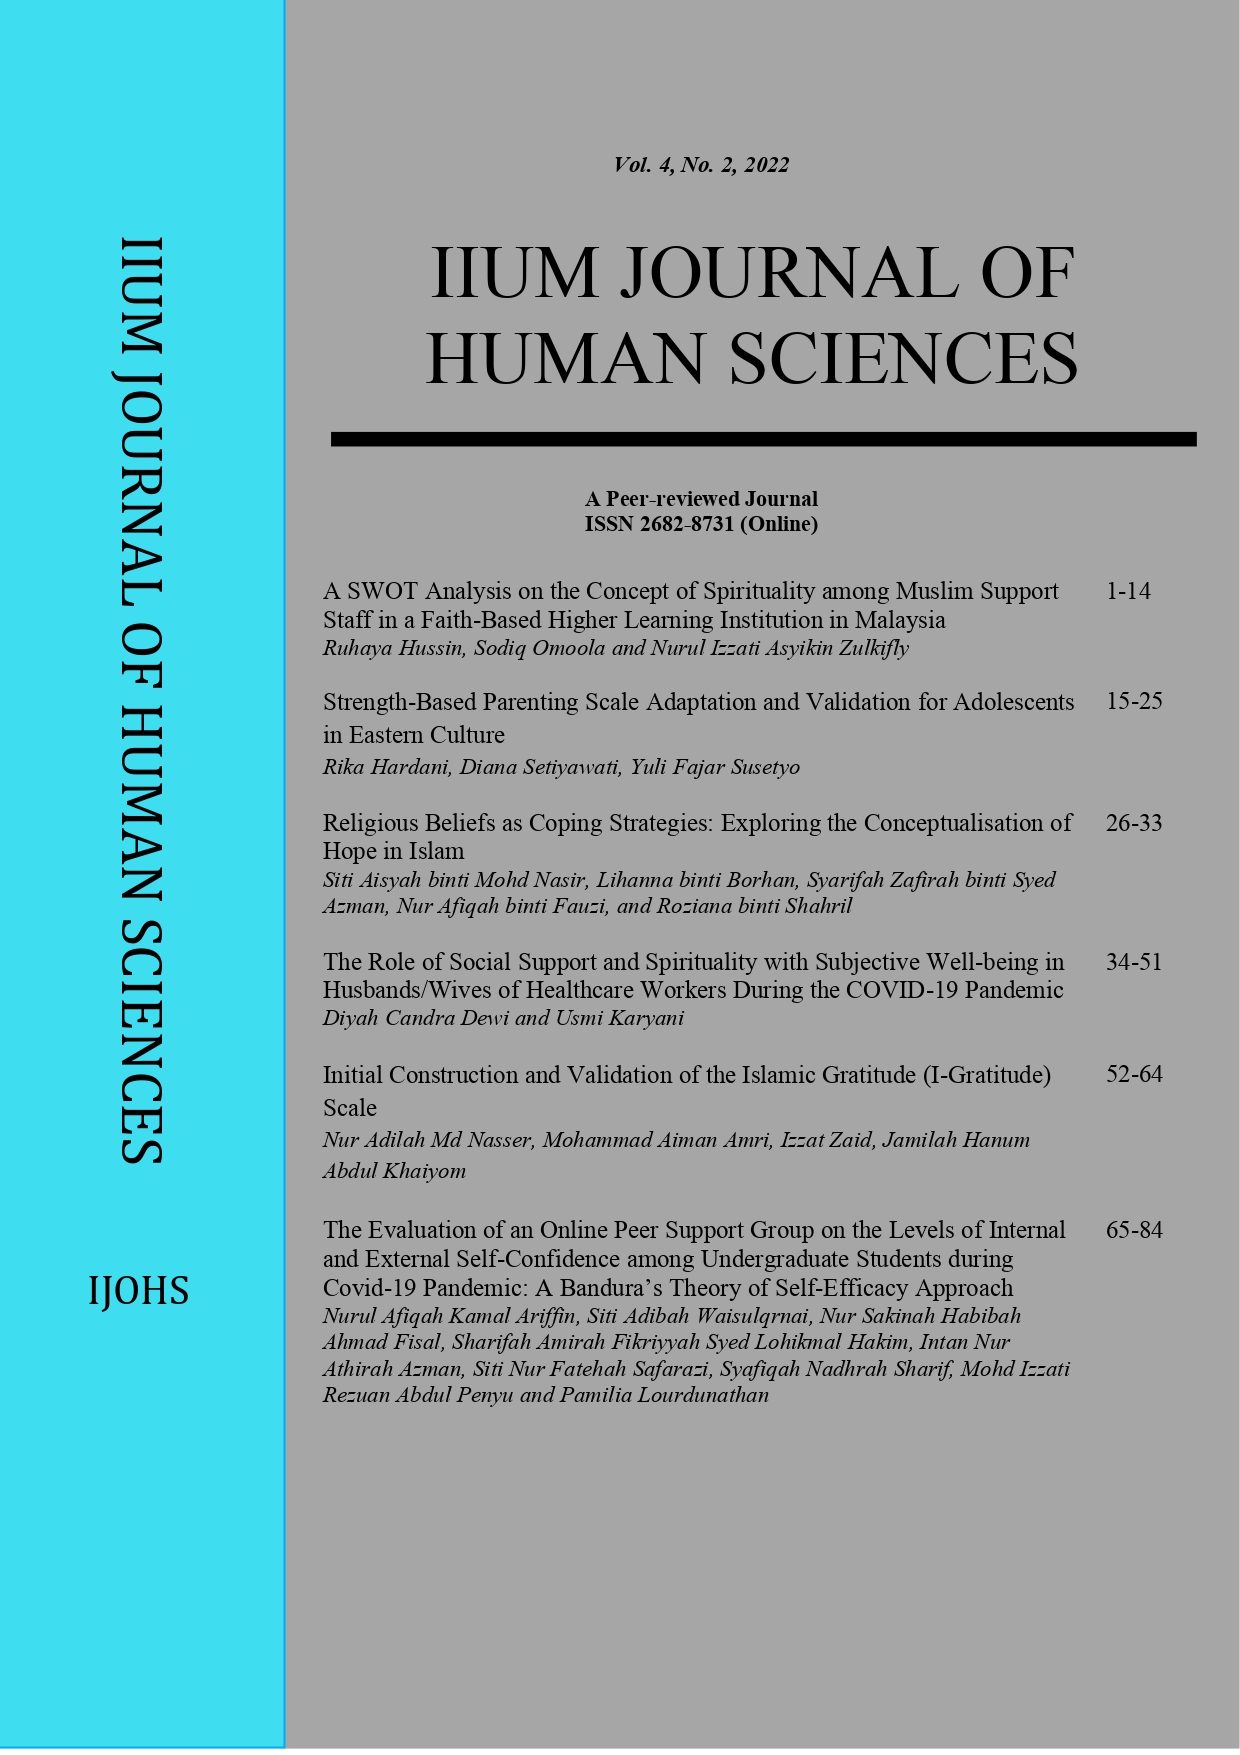 					View Vol. 4 No. 2 (2022): Application of Human Sciences Knowledge and Principles
				